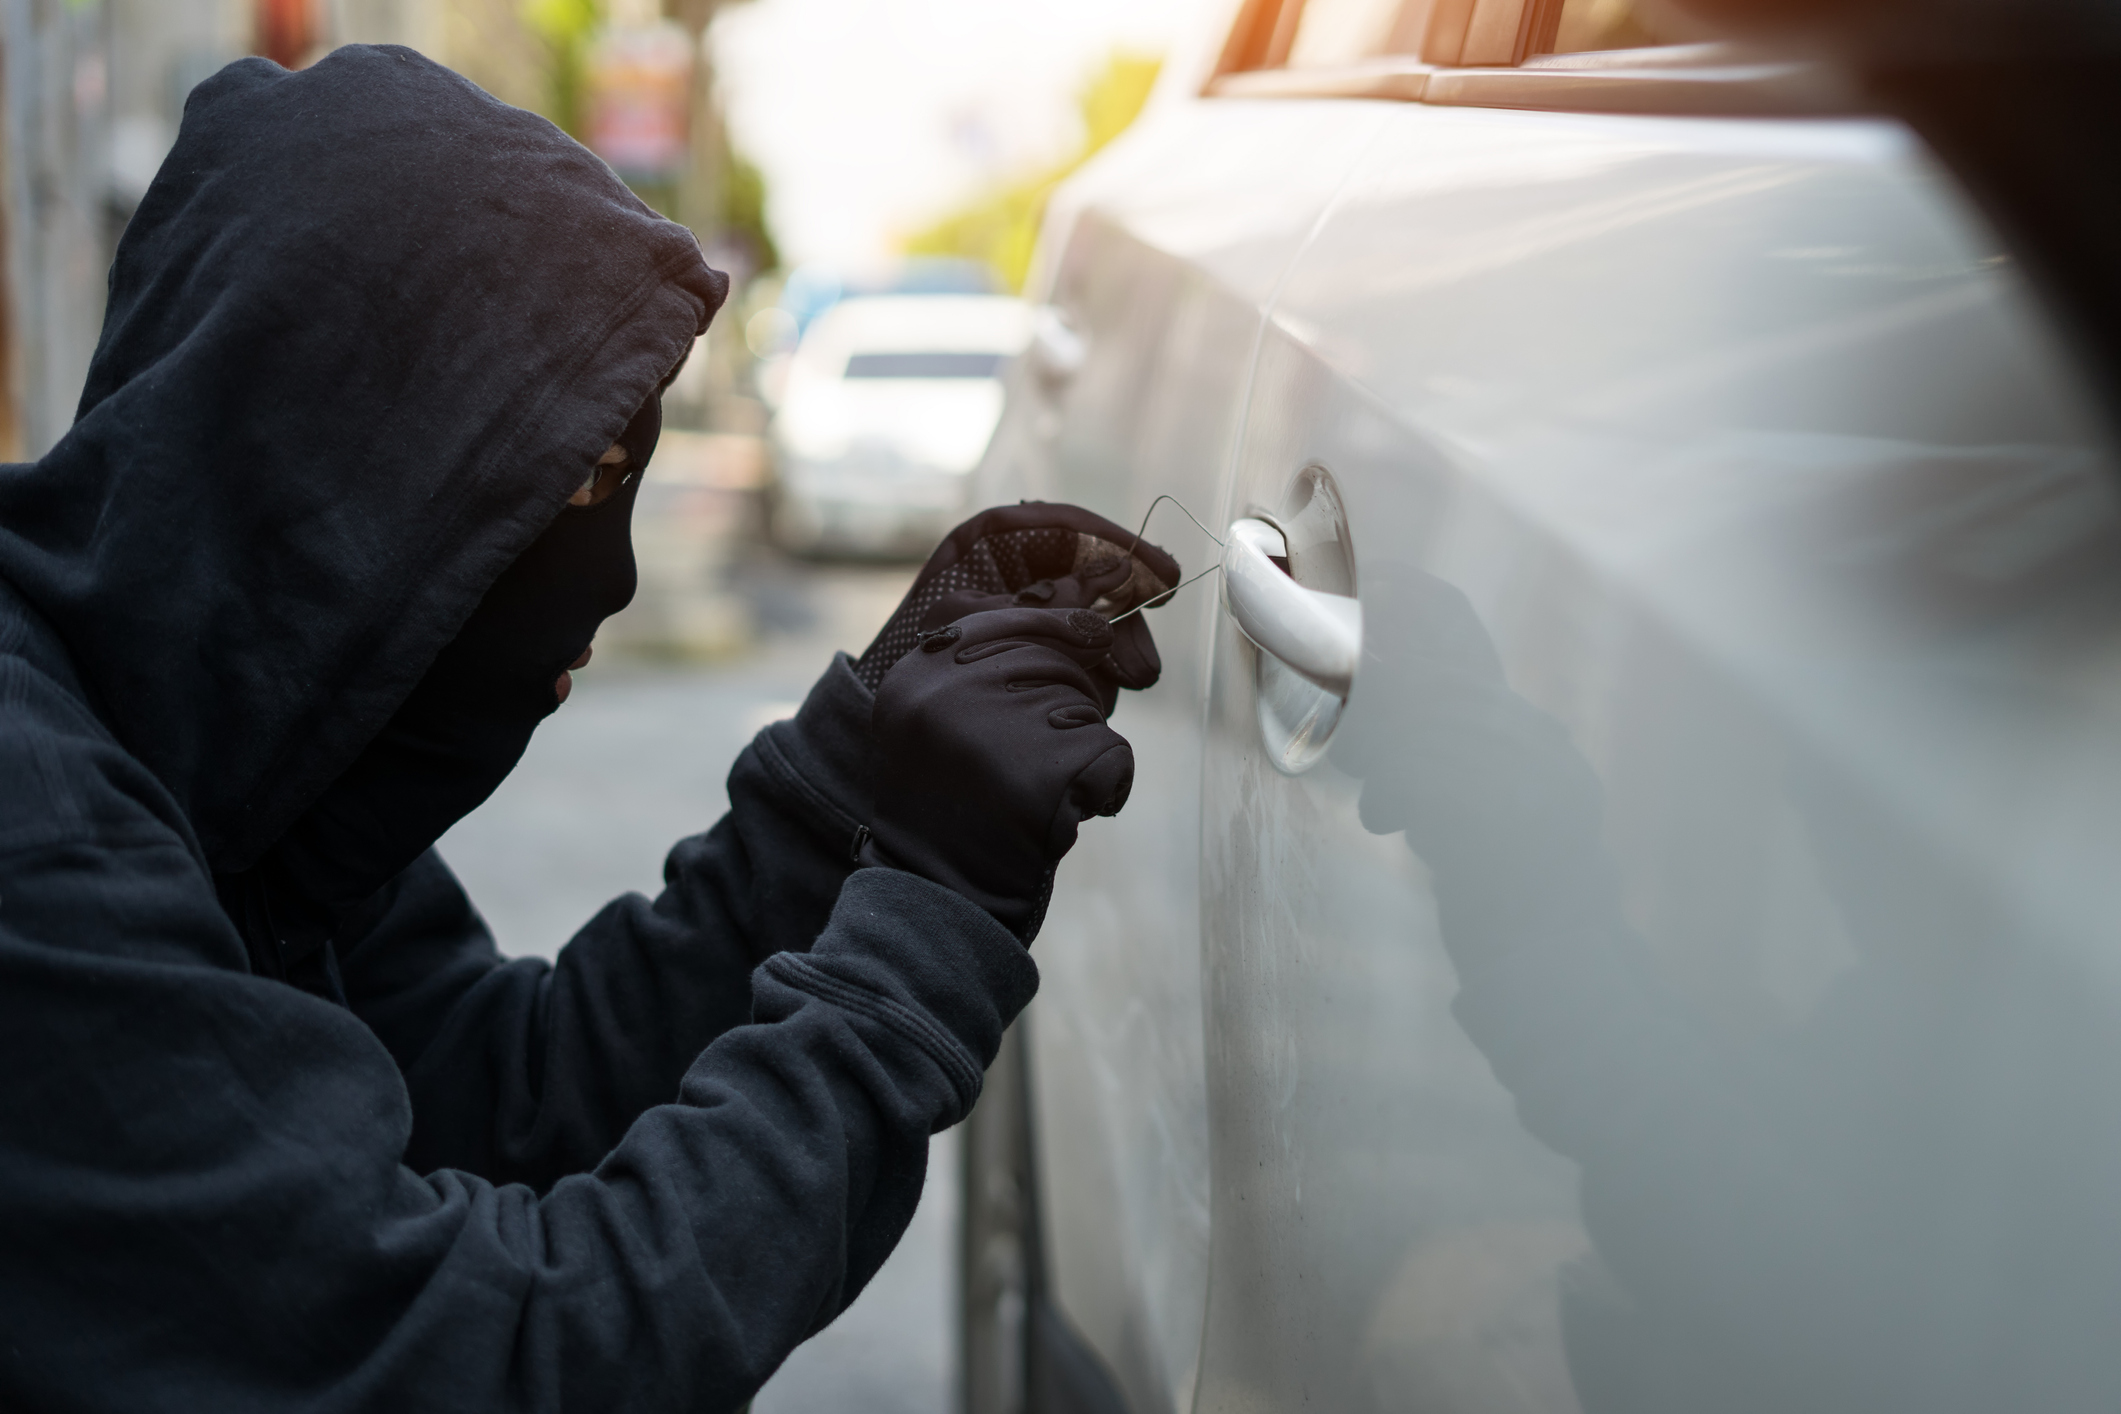 A hooded person breaking in to a vehicle